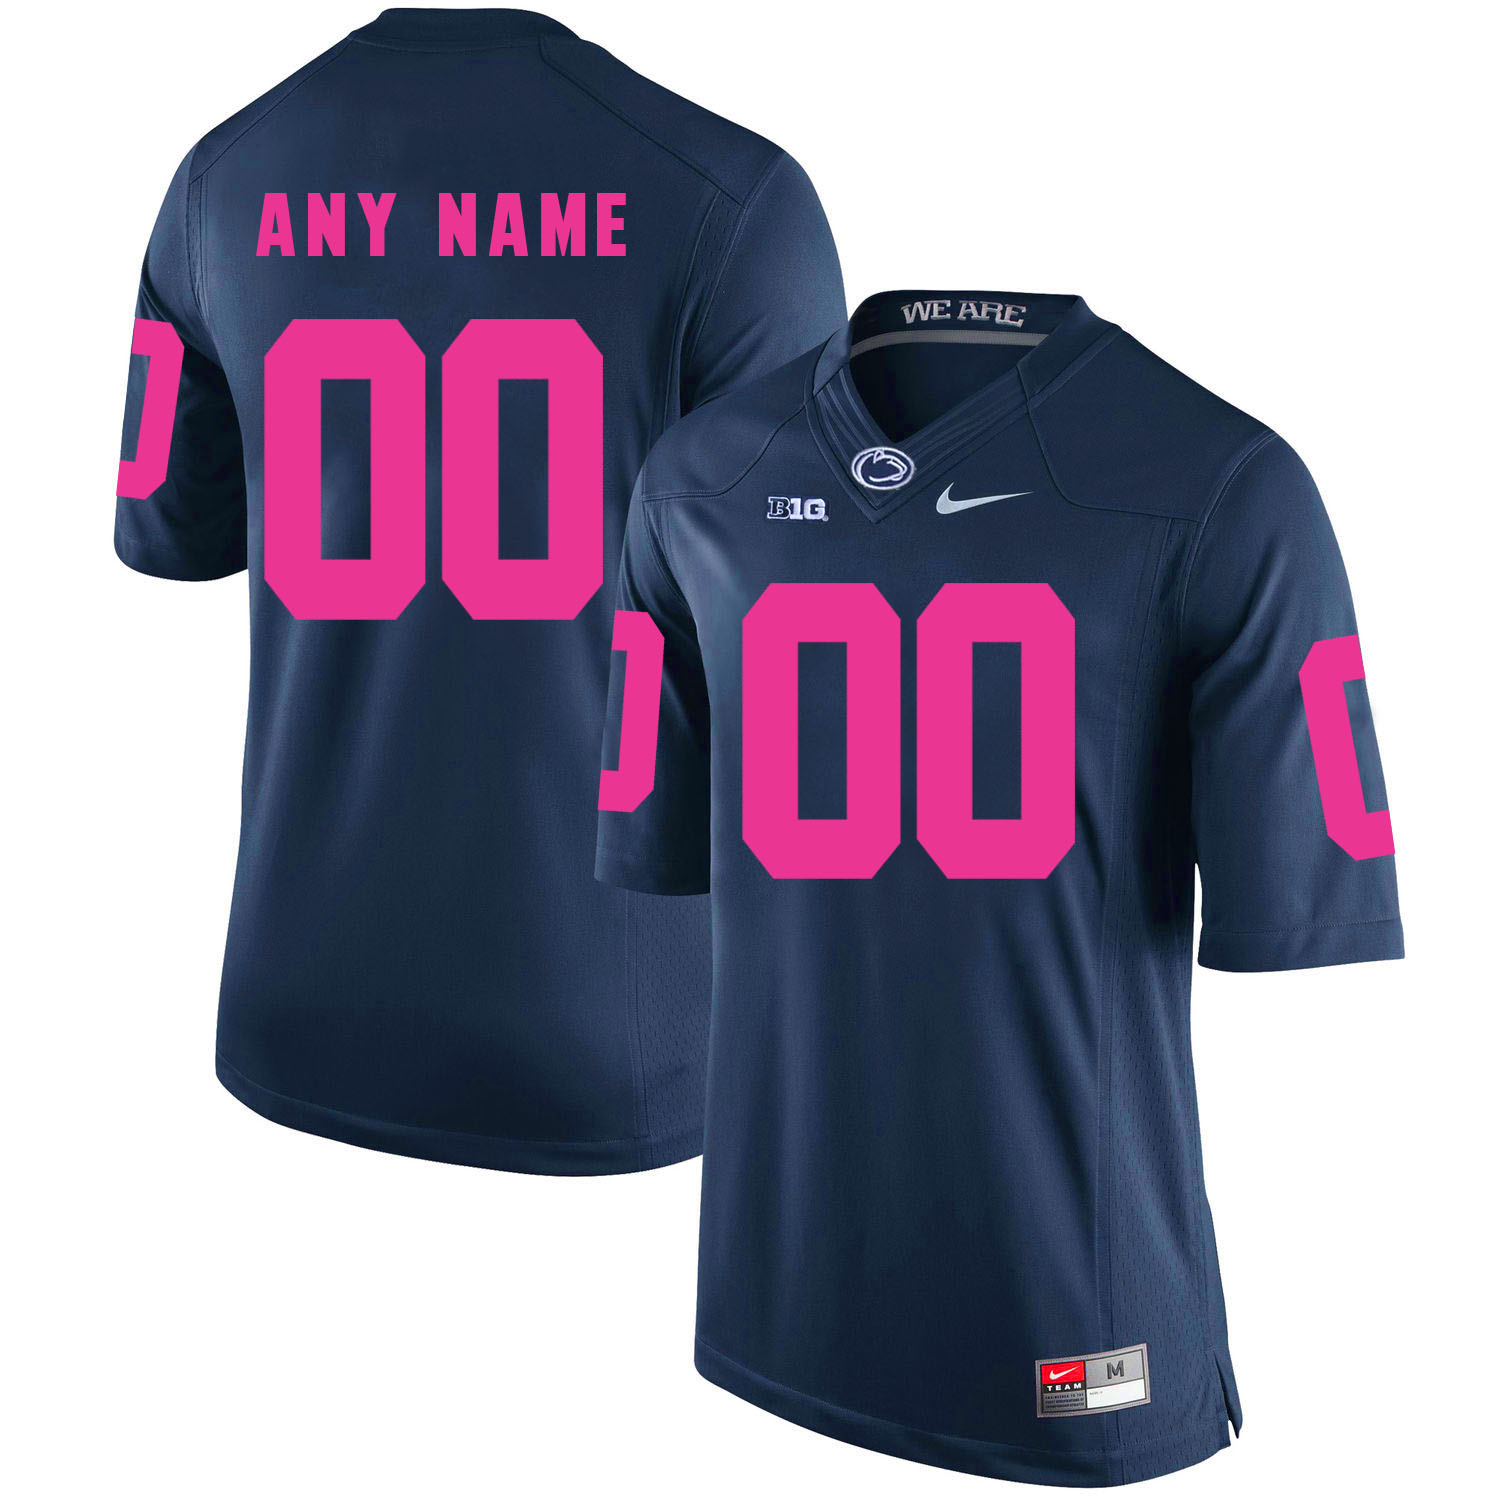 Penn State Nittany Lions Navy 2018 Breast Cancer Awareness Men's Customized College Football Jersey